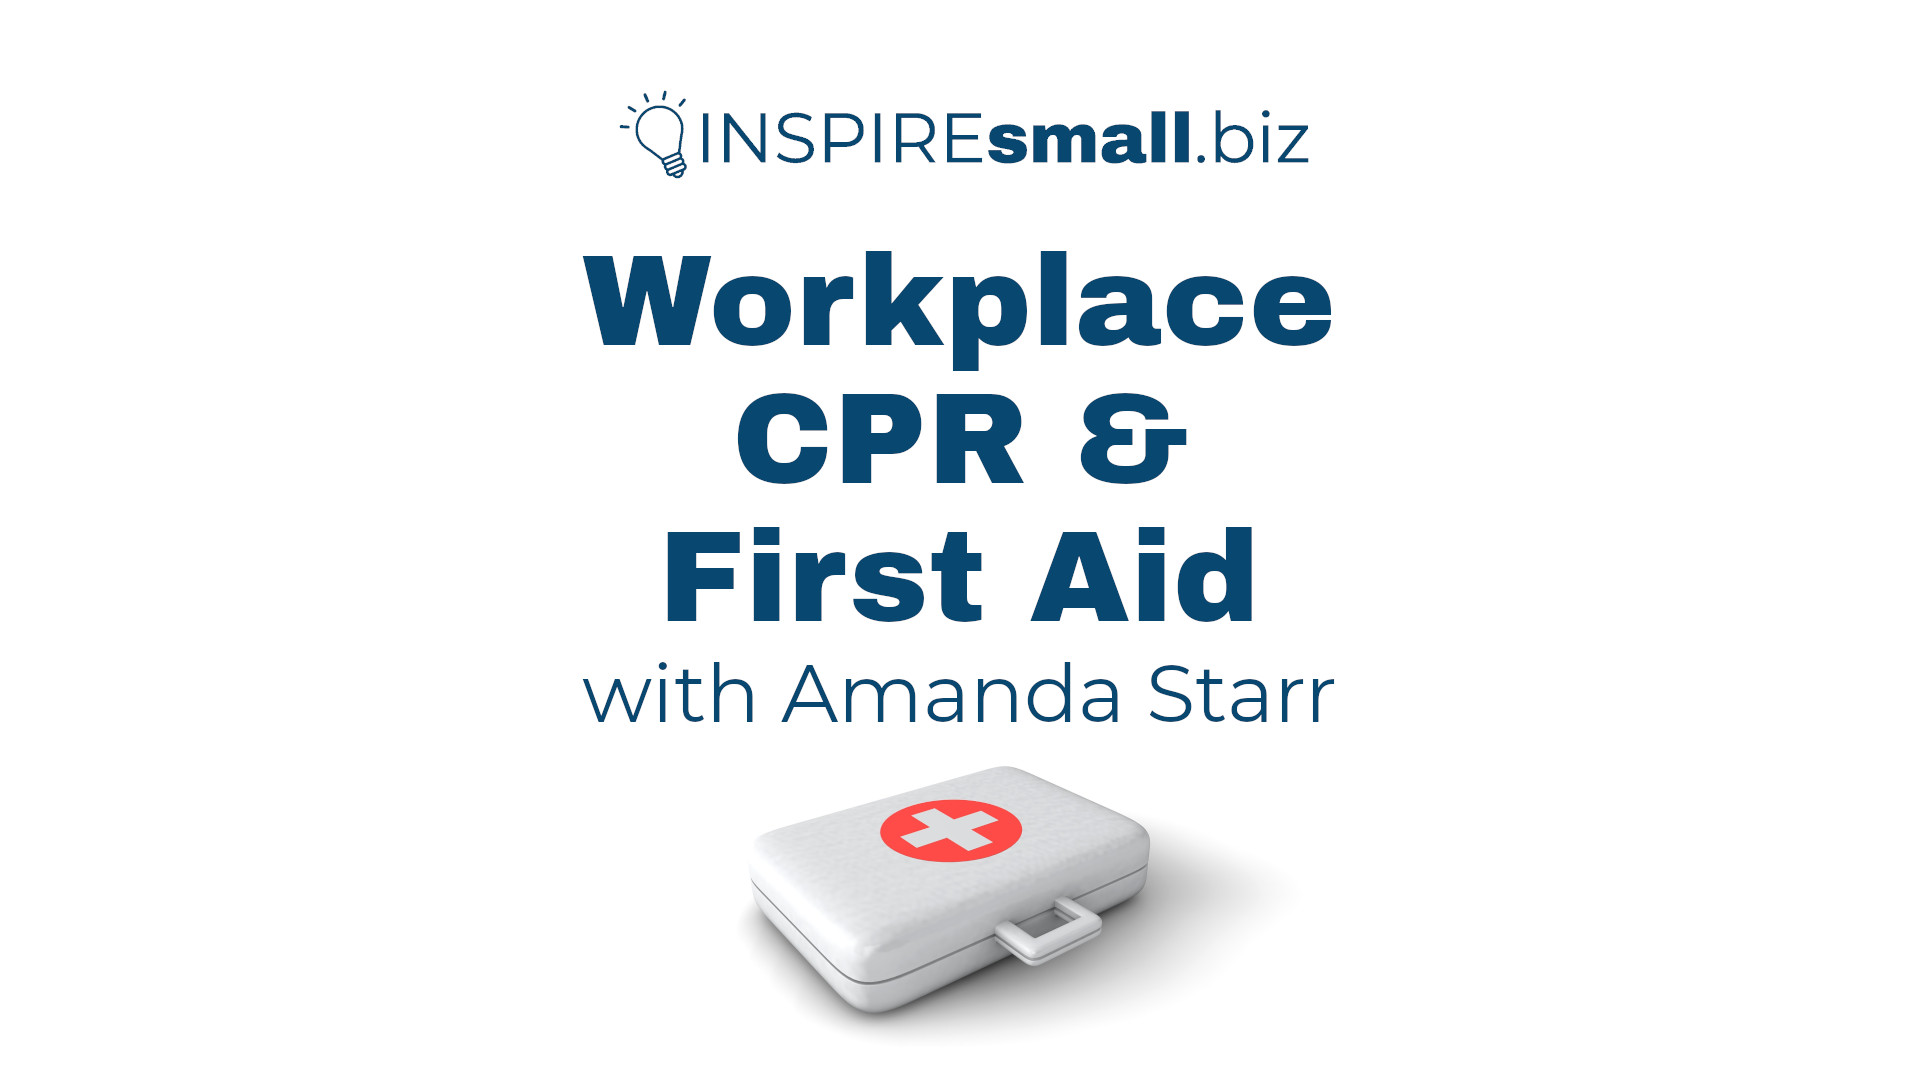 A first aid kit with text: Workplace CPR and First Aid with Amanda Starr, hosted by INSPIREsmall.biz